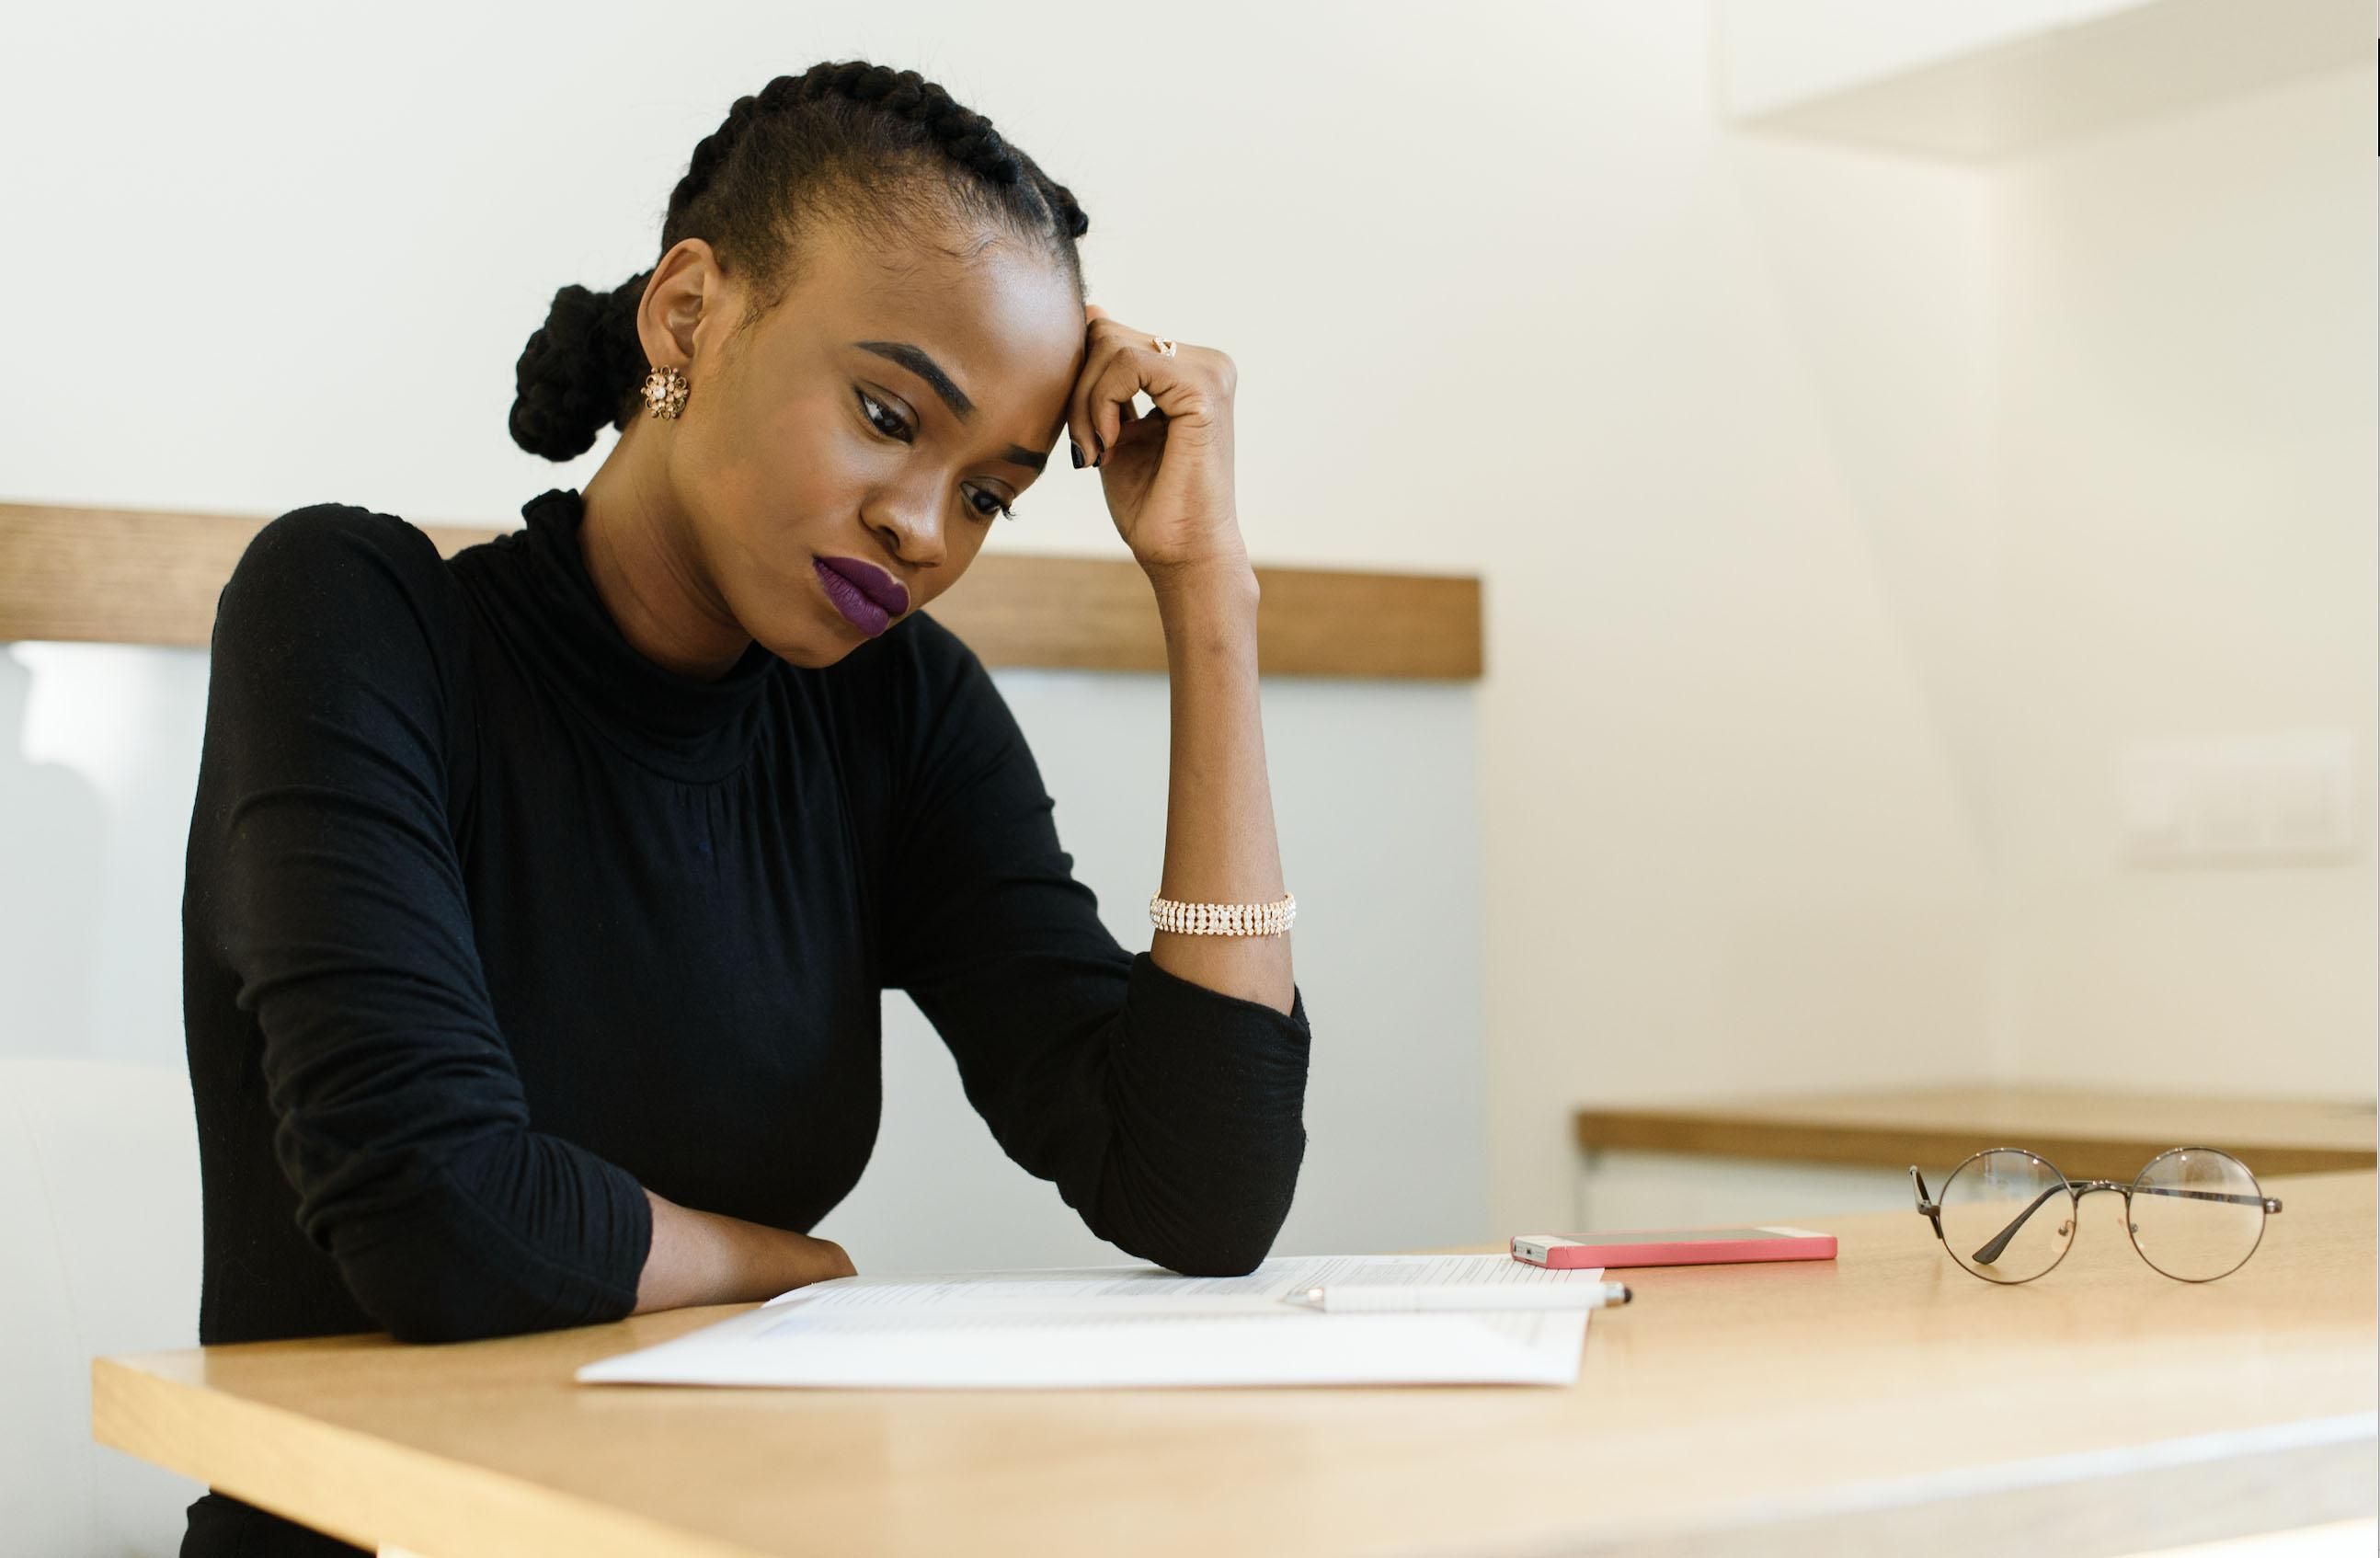 African-American woman in black shirt sitting at wooden desk in fustration